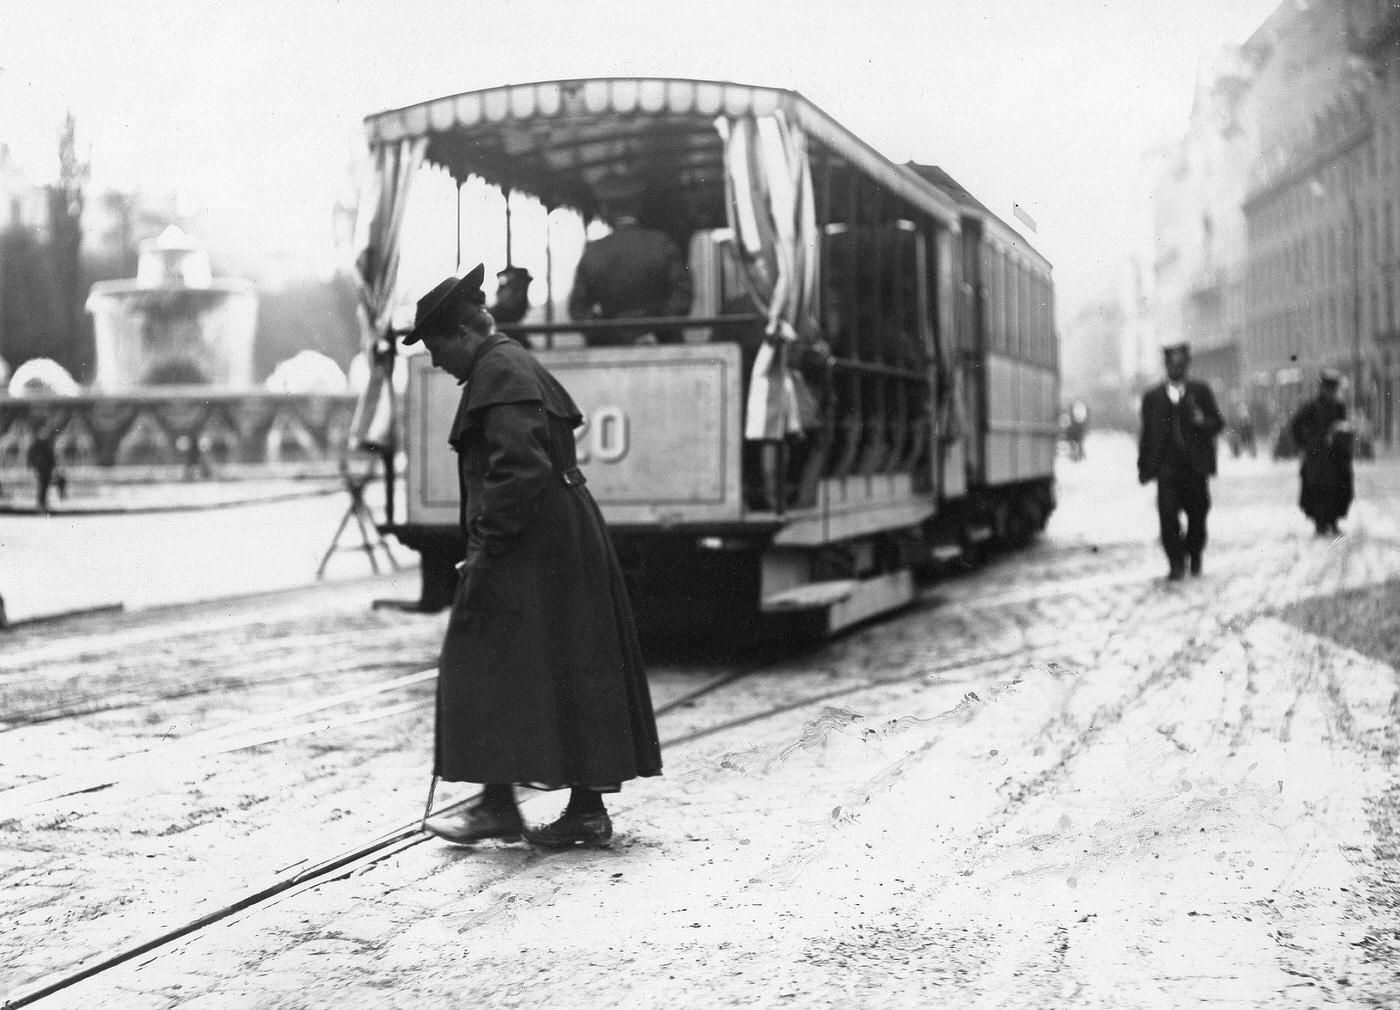 Woman changing points for the tram, Munich, Germany, around 1900.